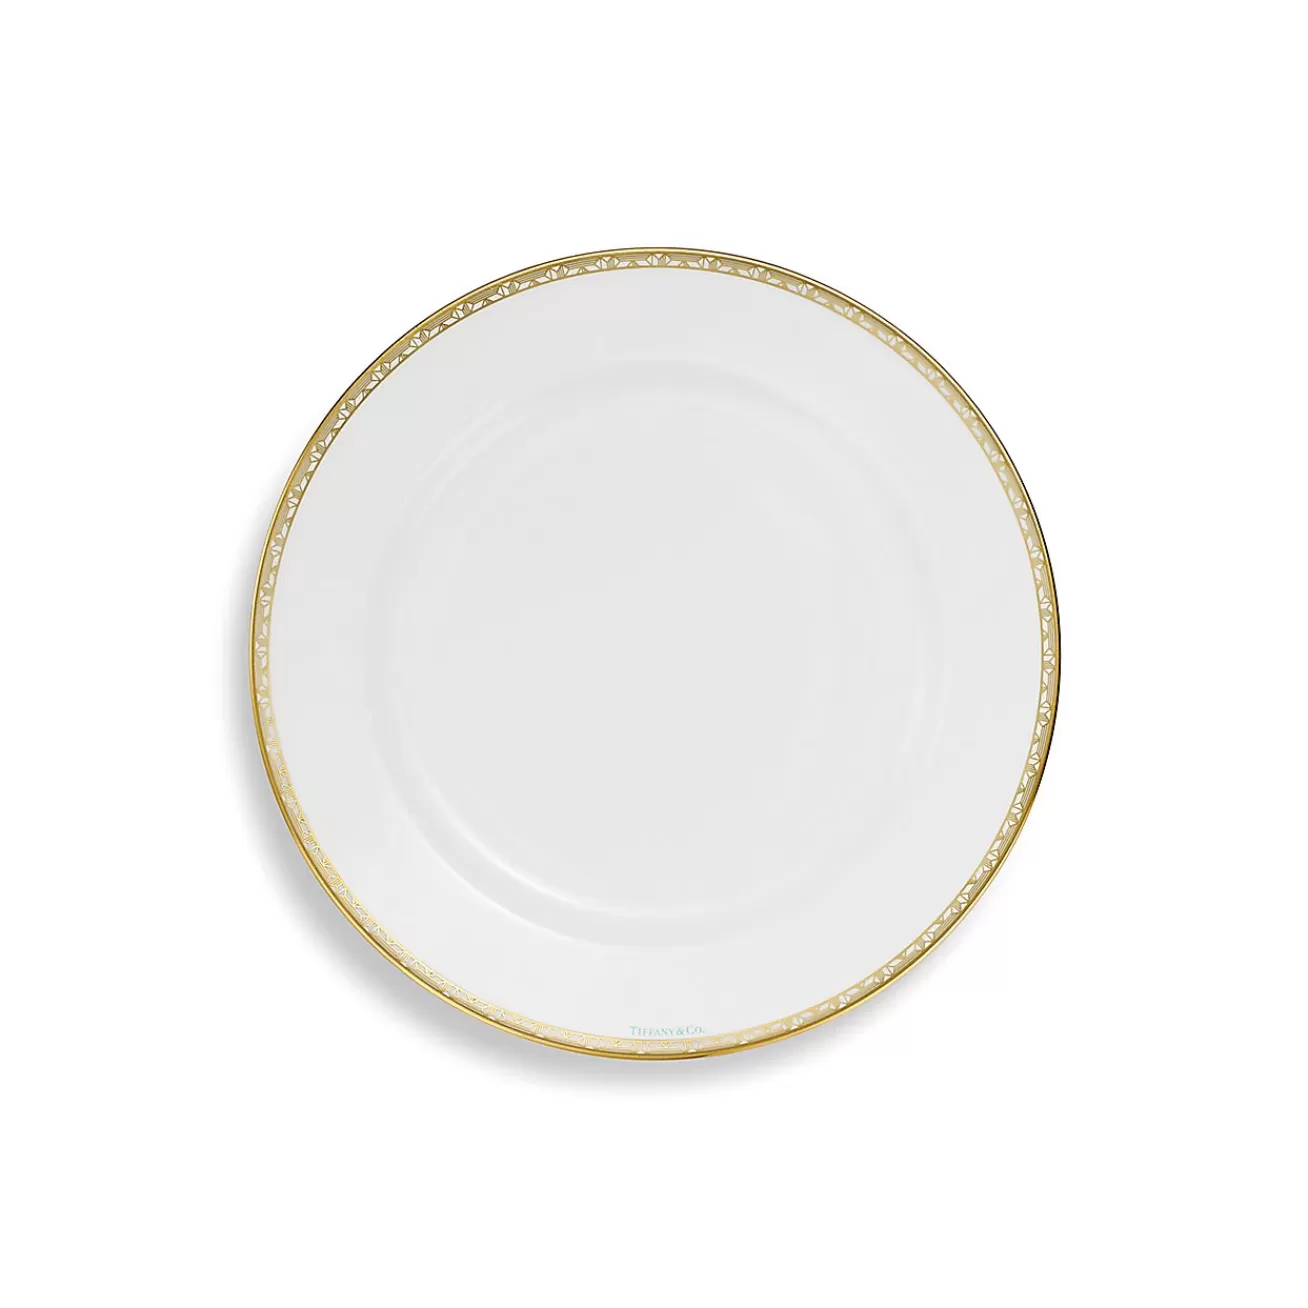 Tiffany & Co. Tiffany T True Dessert Plate with a Hand-painted Gold Rim | ^ Tableware